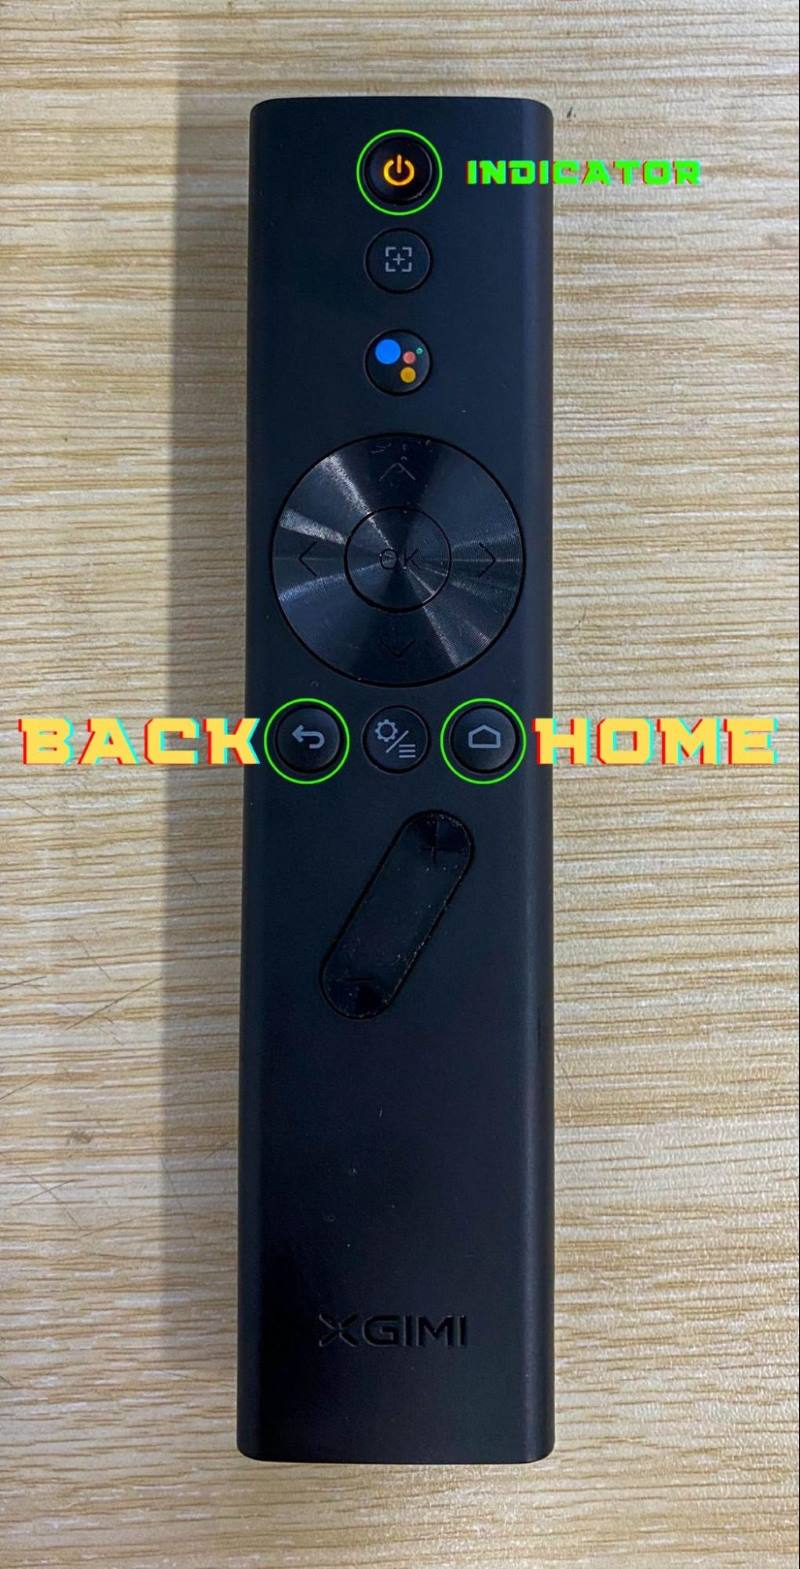 select both BACK and HOME buttons on the XGIMI remote at the same time until the INDICATOR light flashing